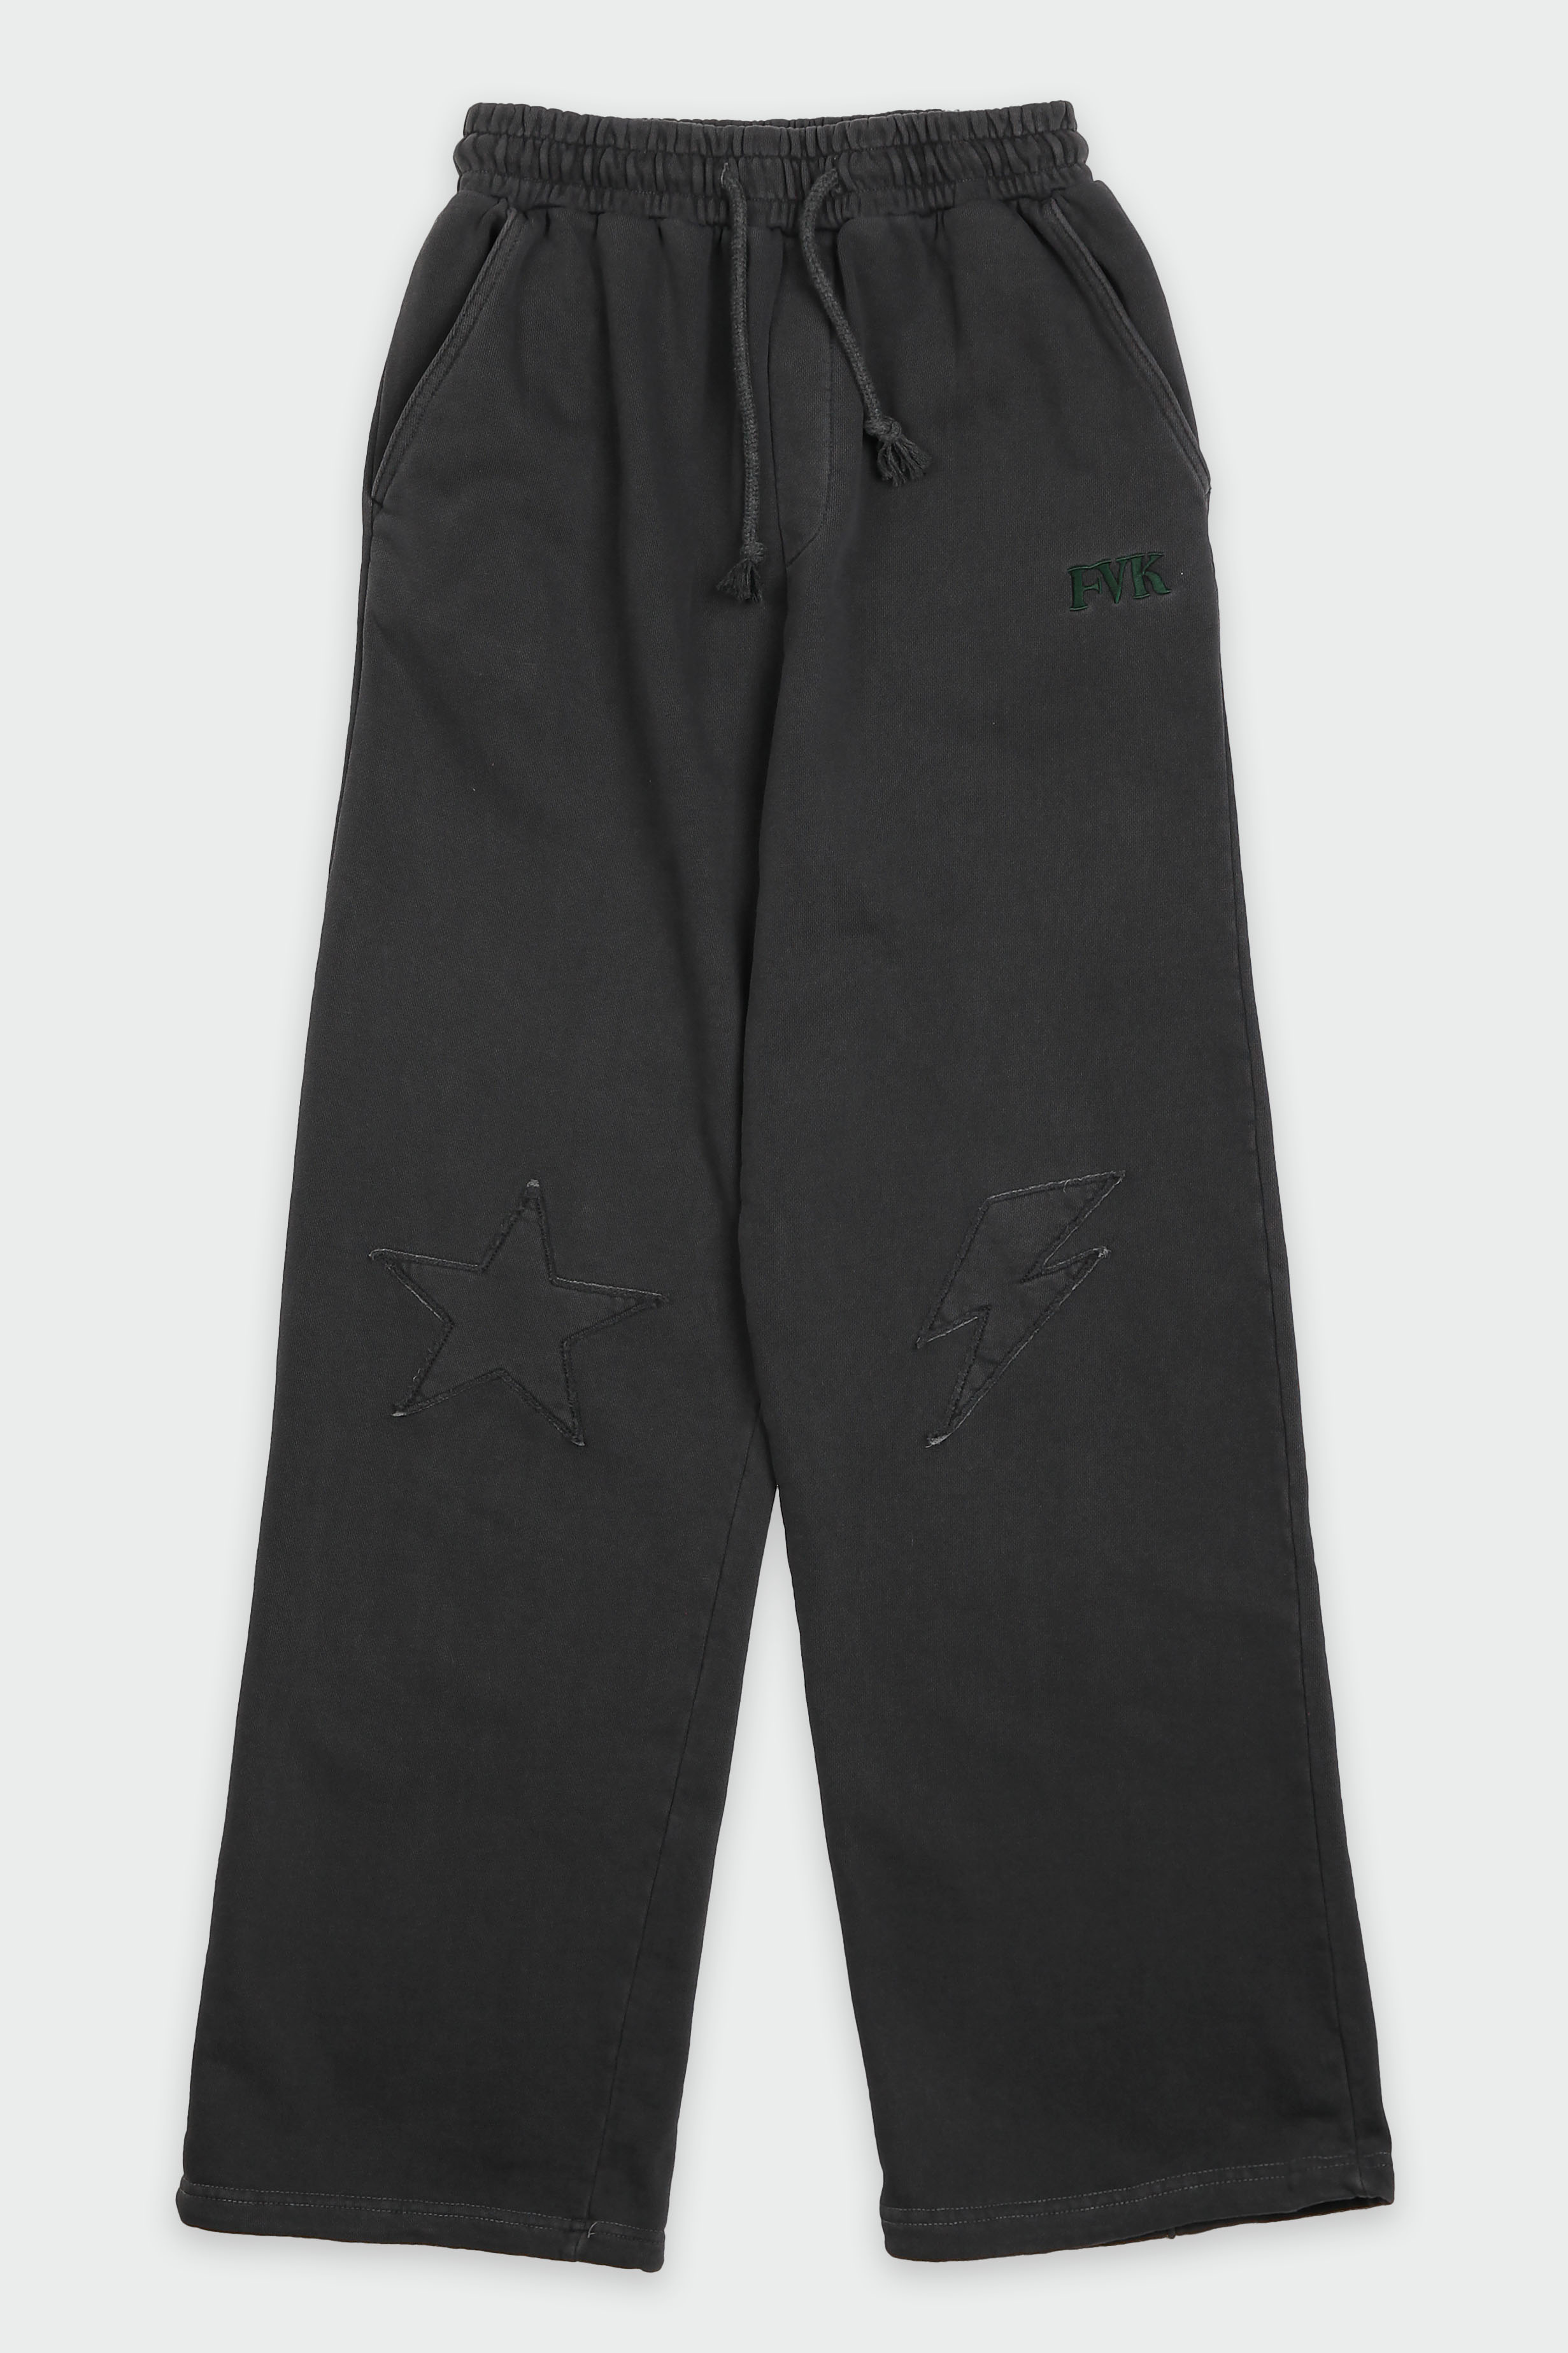 Patch sweatpants(washed charcoal)